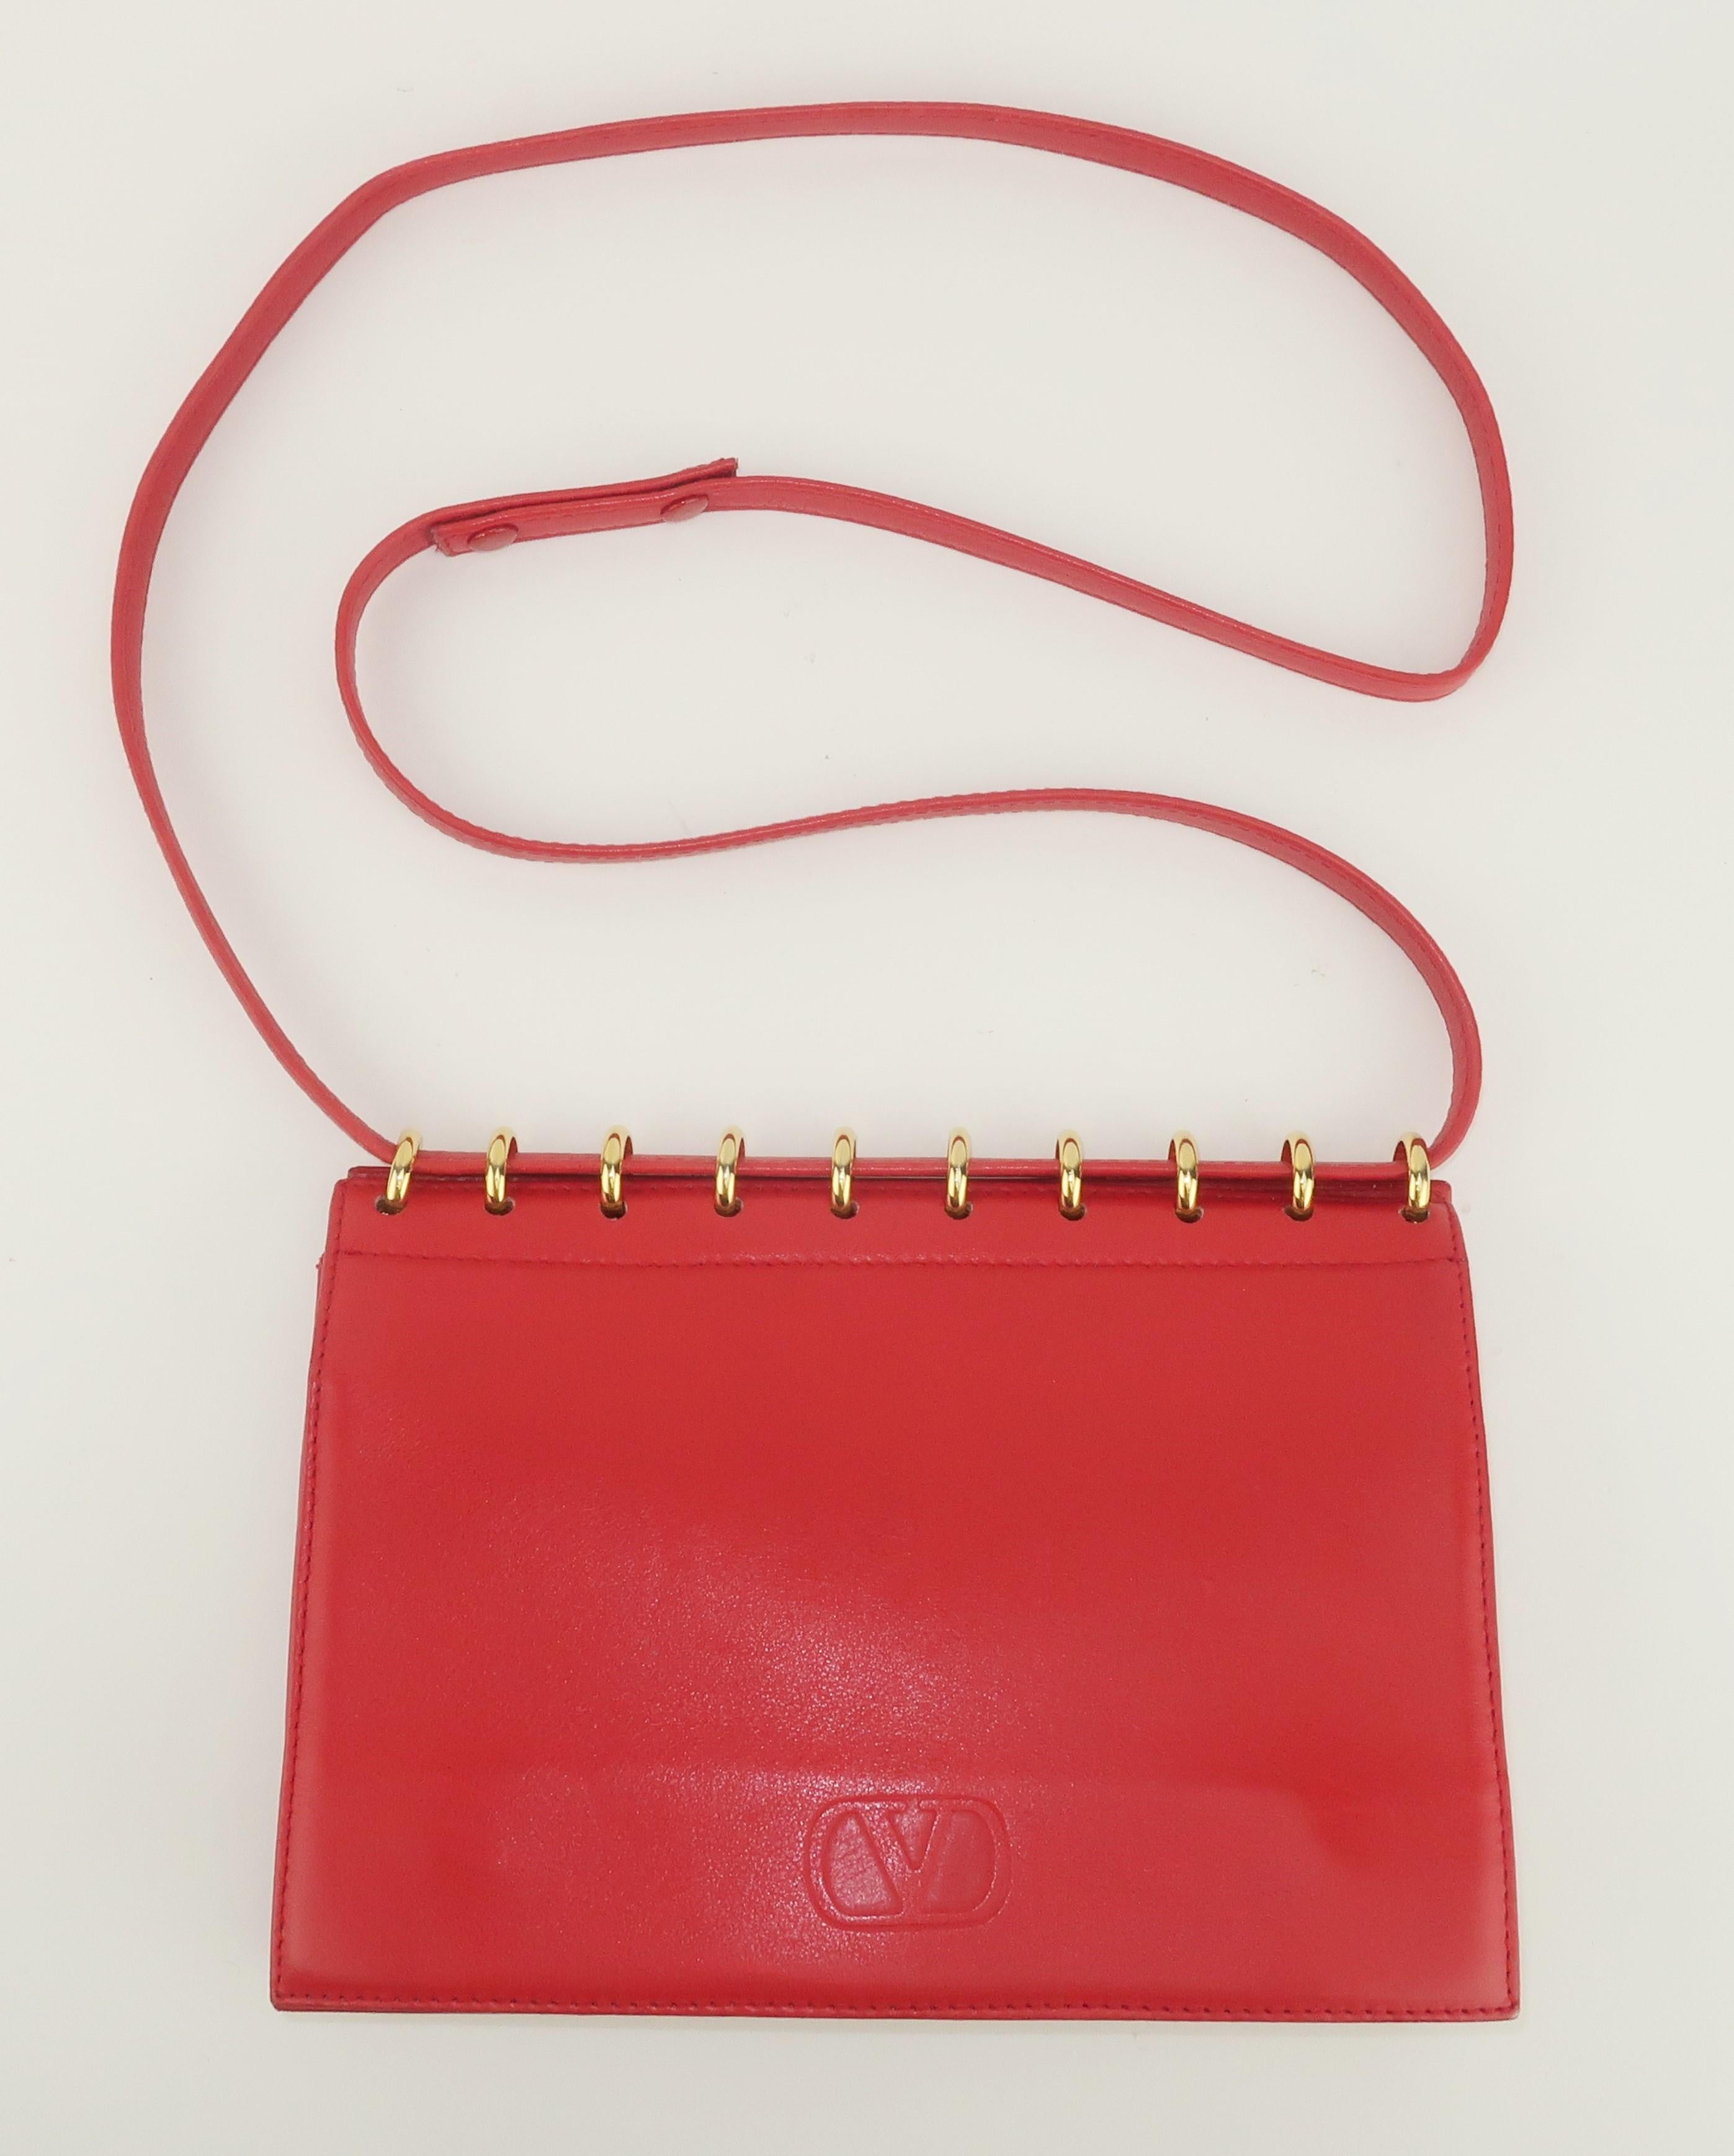 Valentino Red Leather Handbag With Spiral Hardware, 1980’s 1